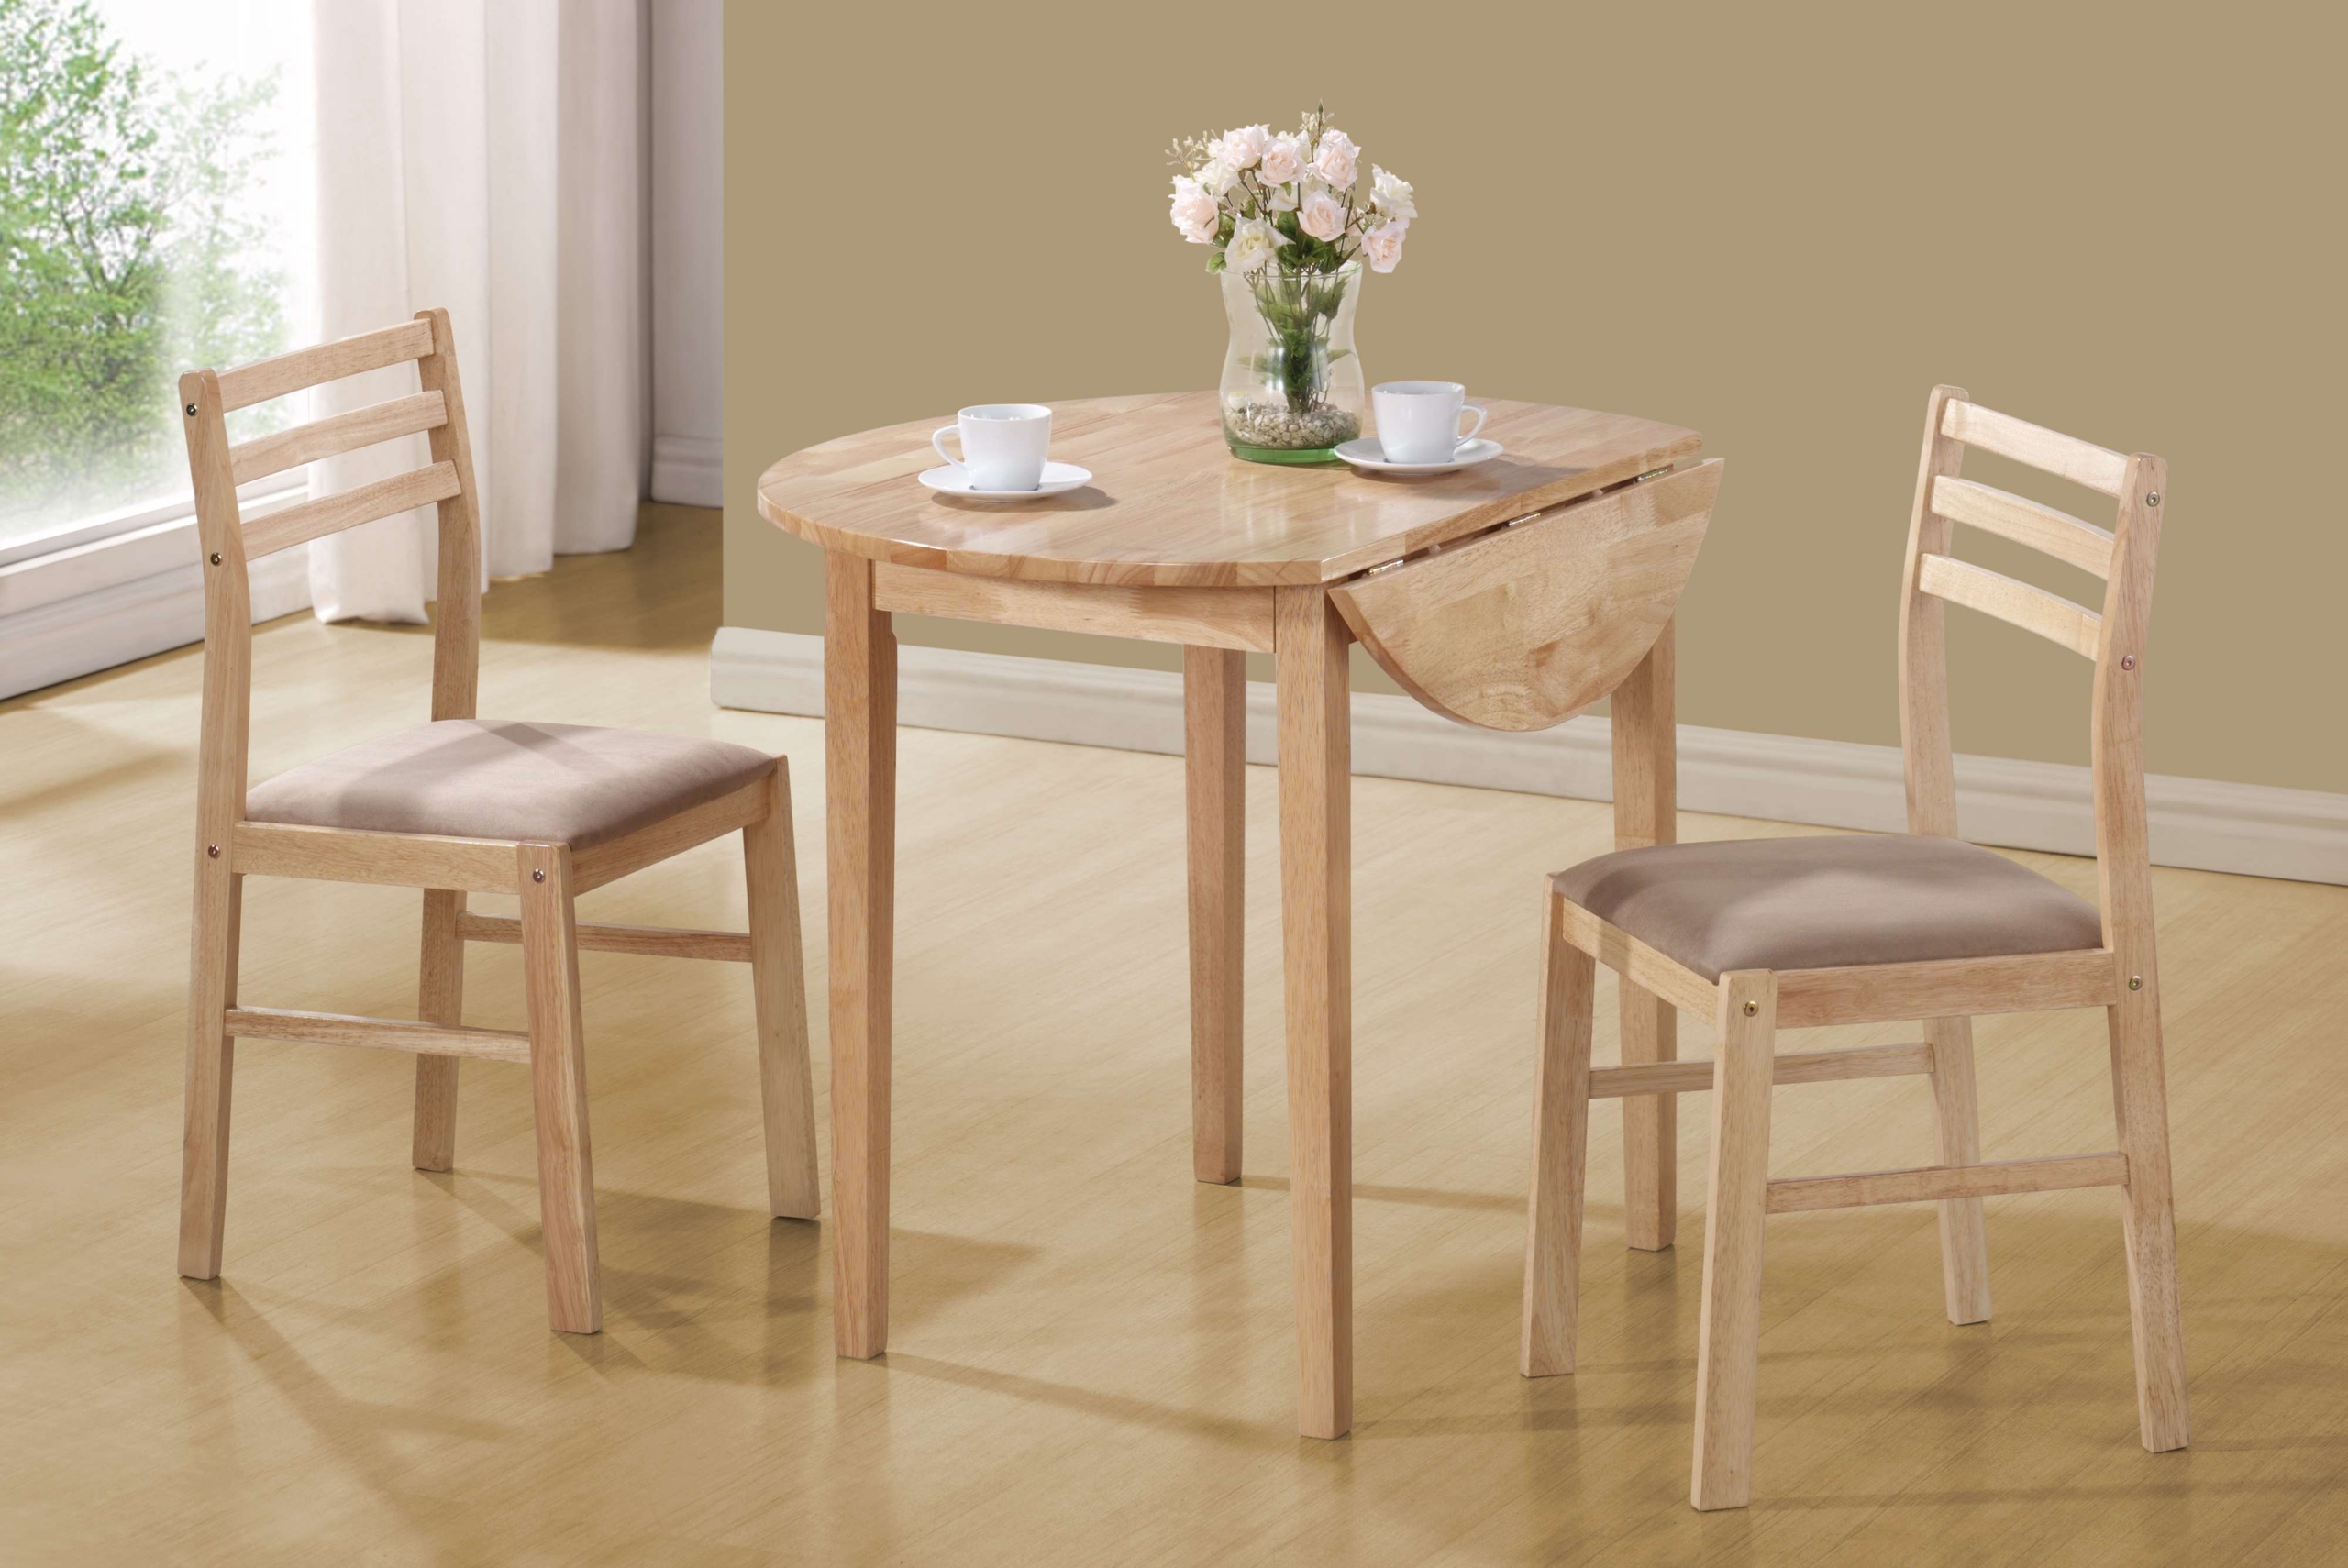 Small Round Dinette Sets 1 